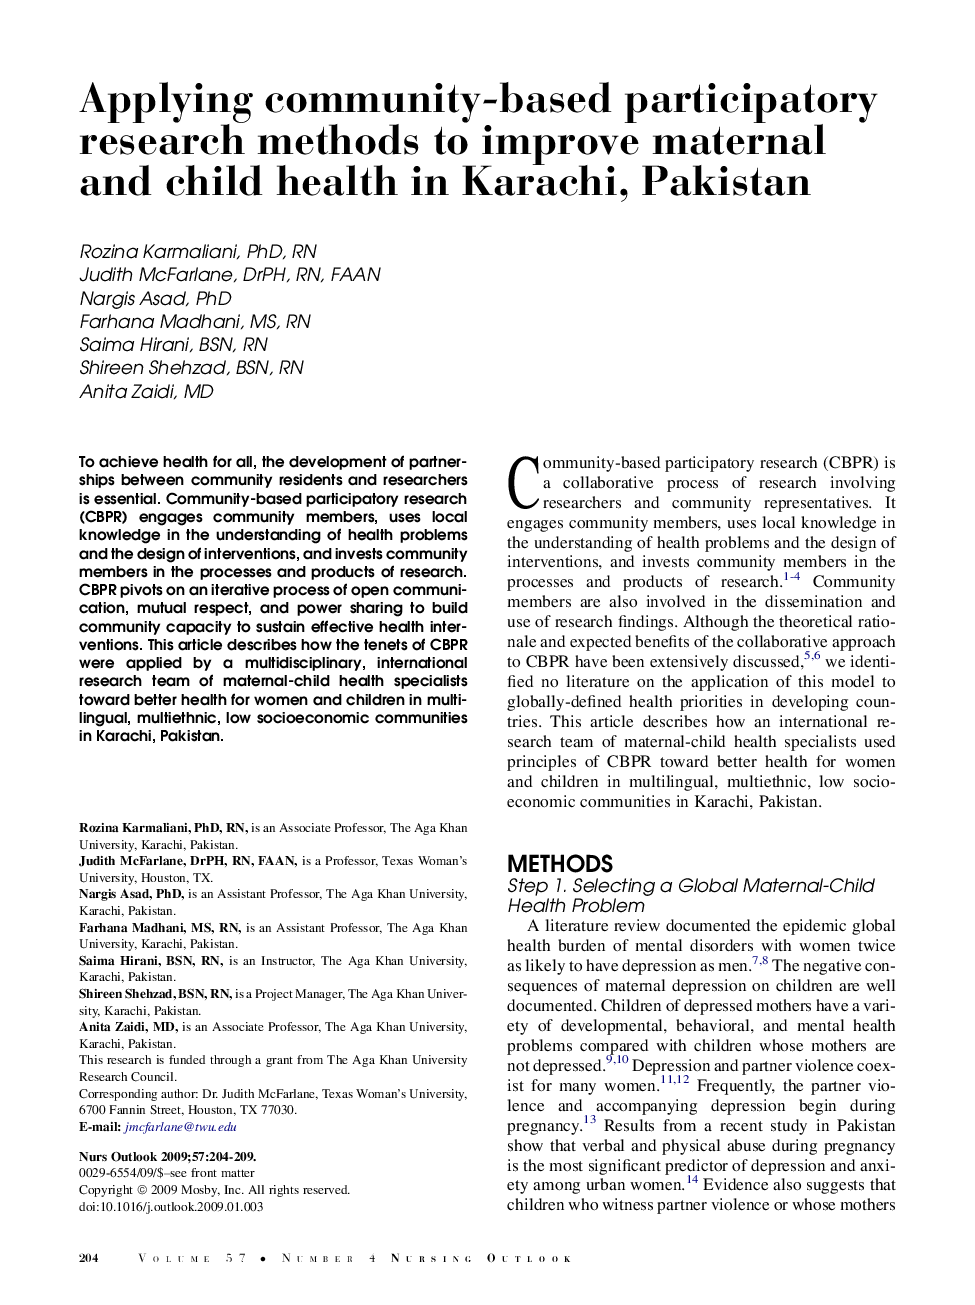 Applying community-based participatory research methods to improve maternal and child health in Karachi, Pakistan 